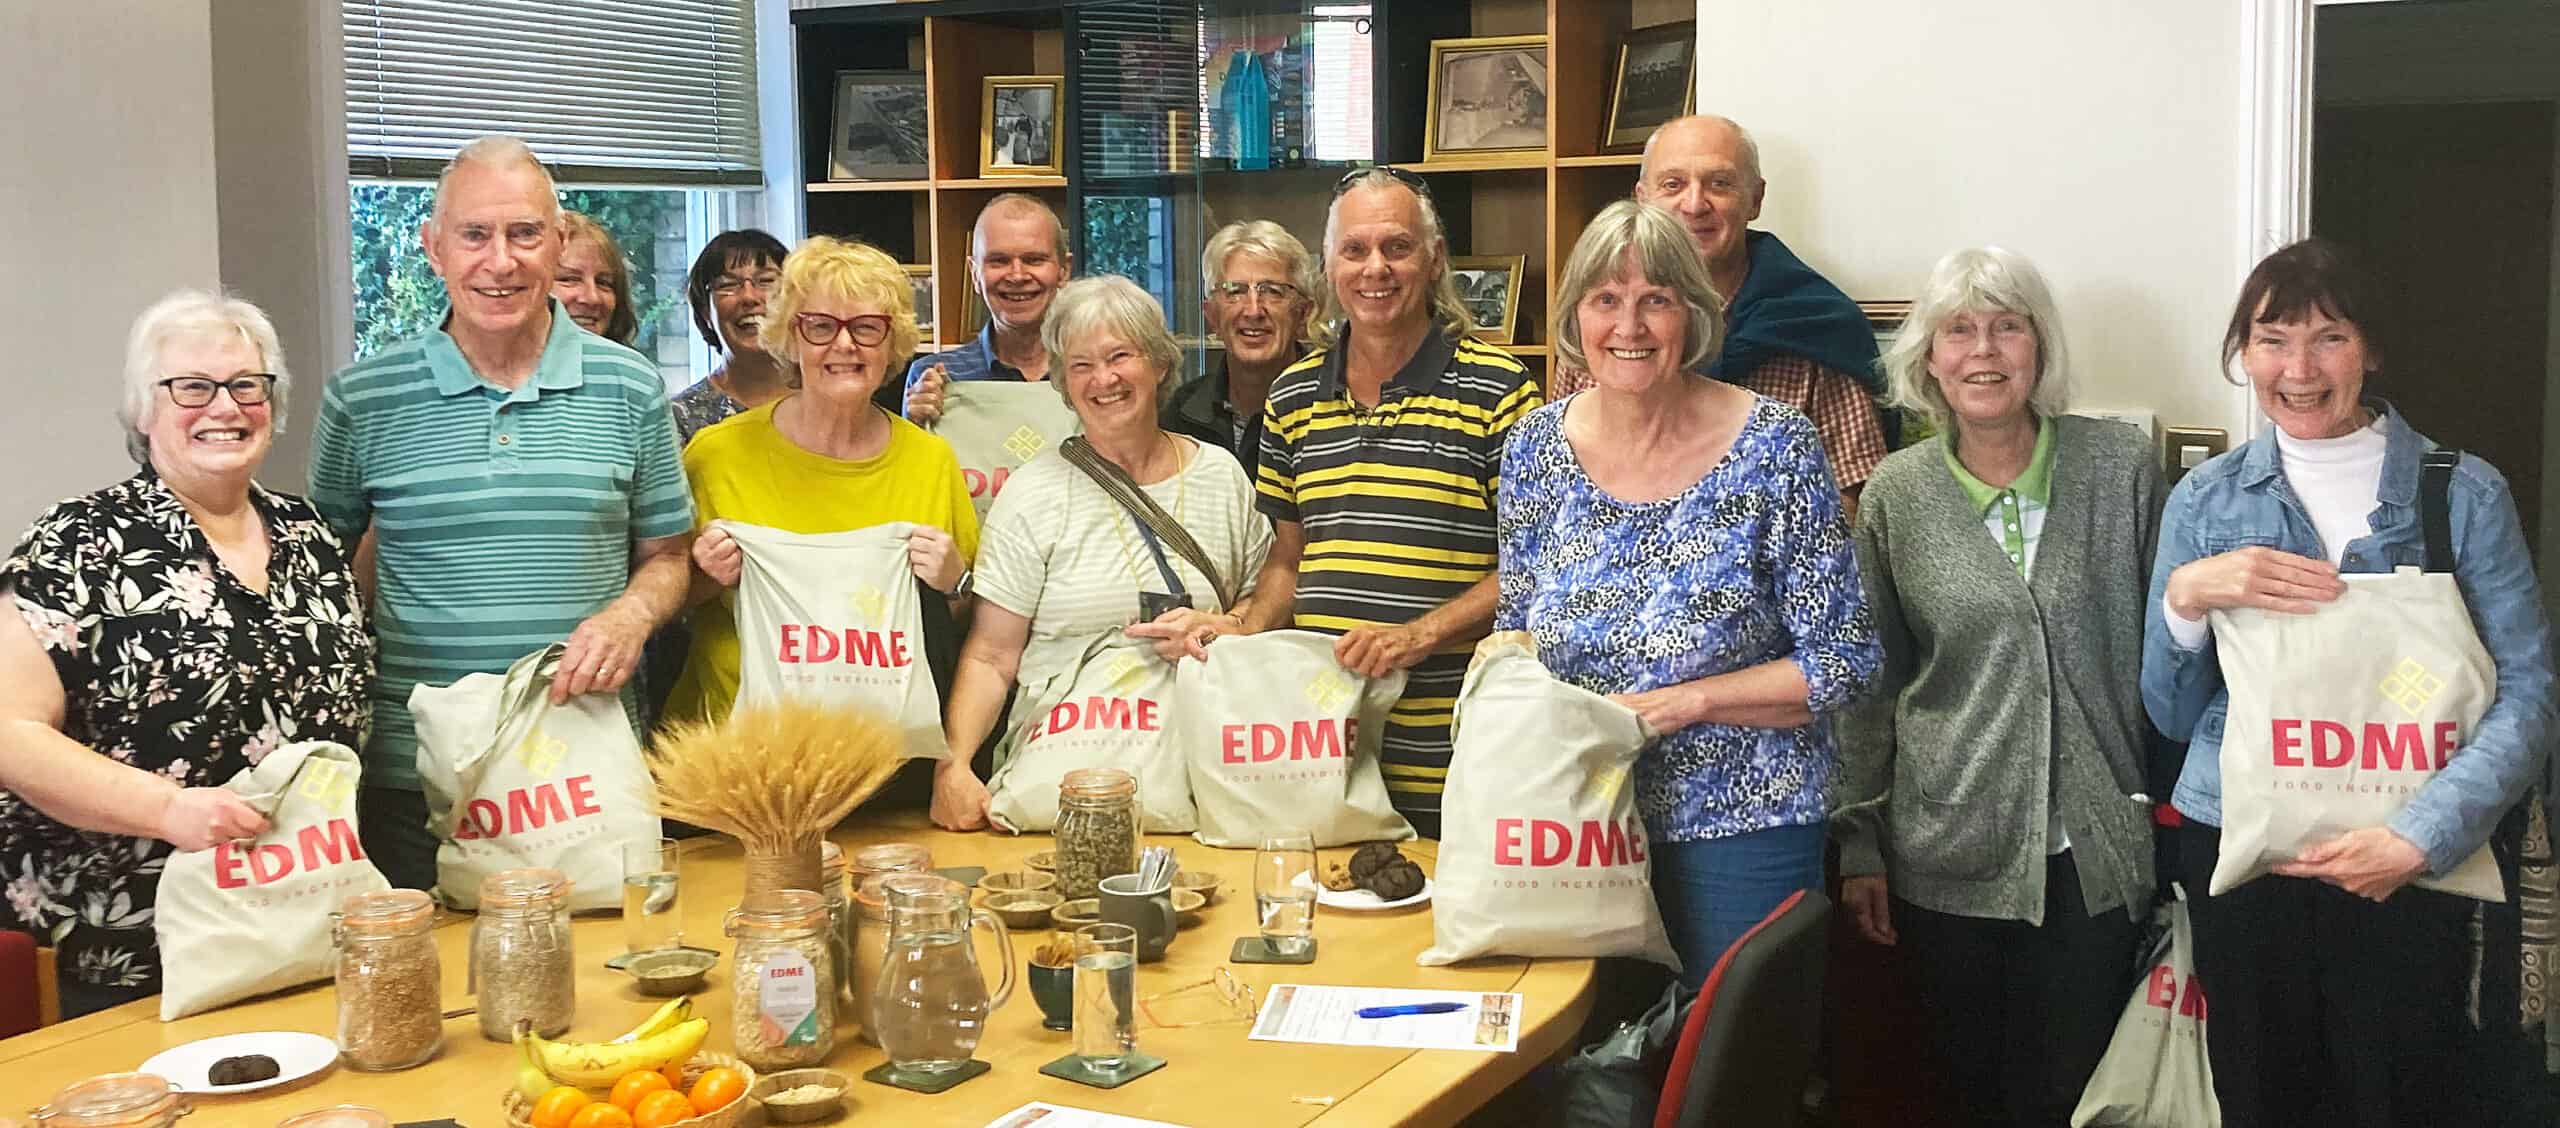 Members of Manningtree History Society and local community with EDME goody bags